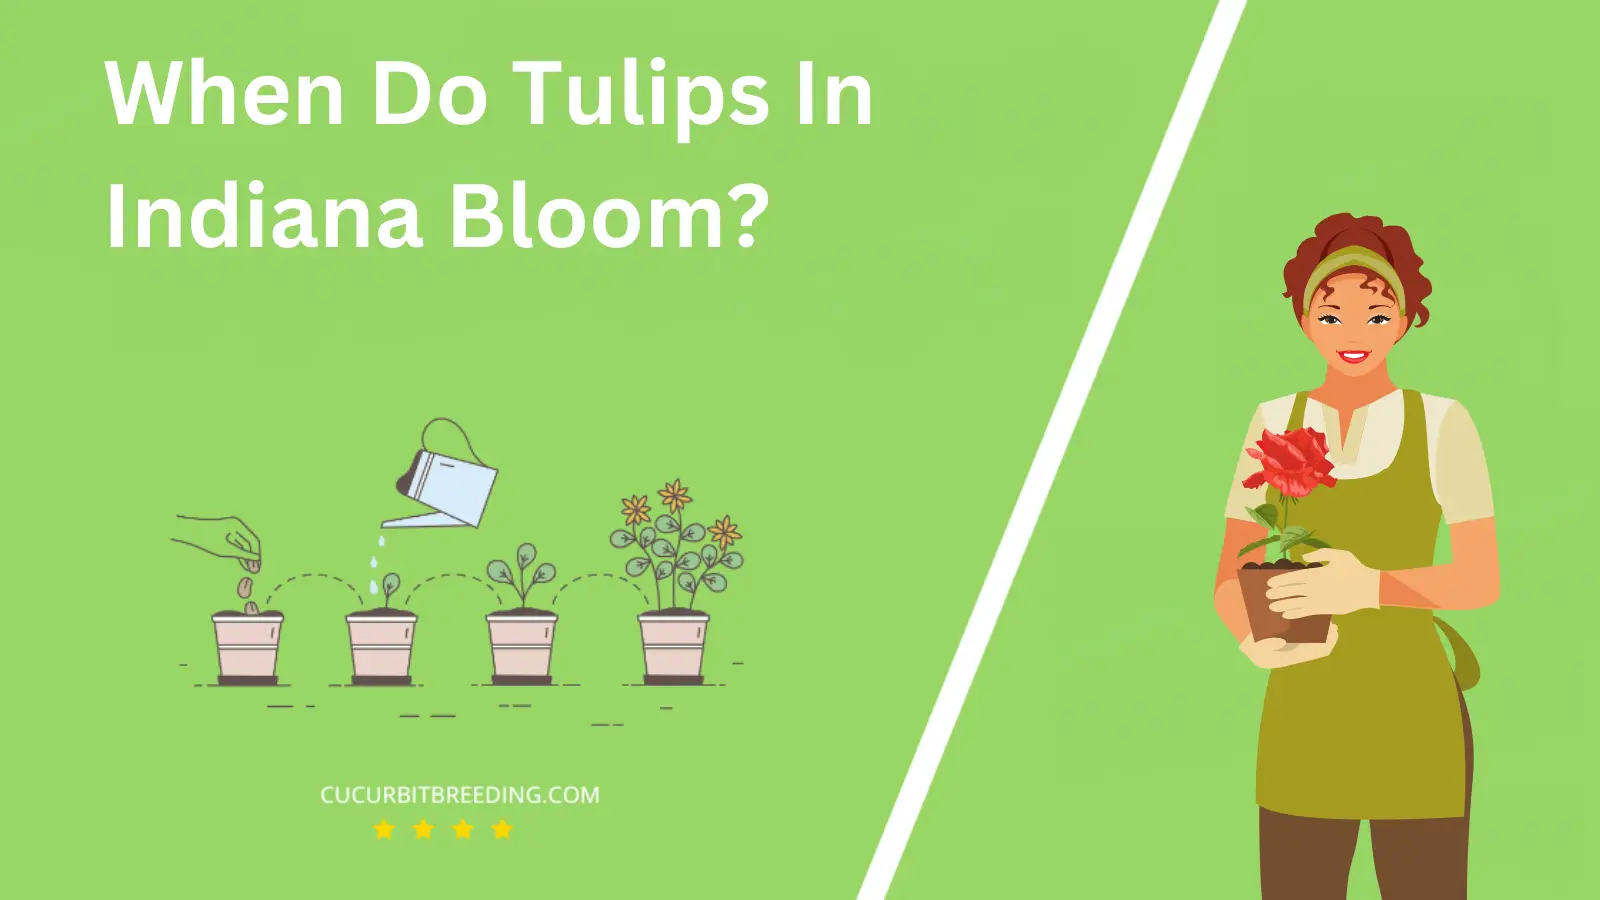 When Do Tulips In Indiana Bloom?